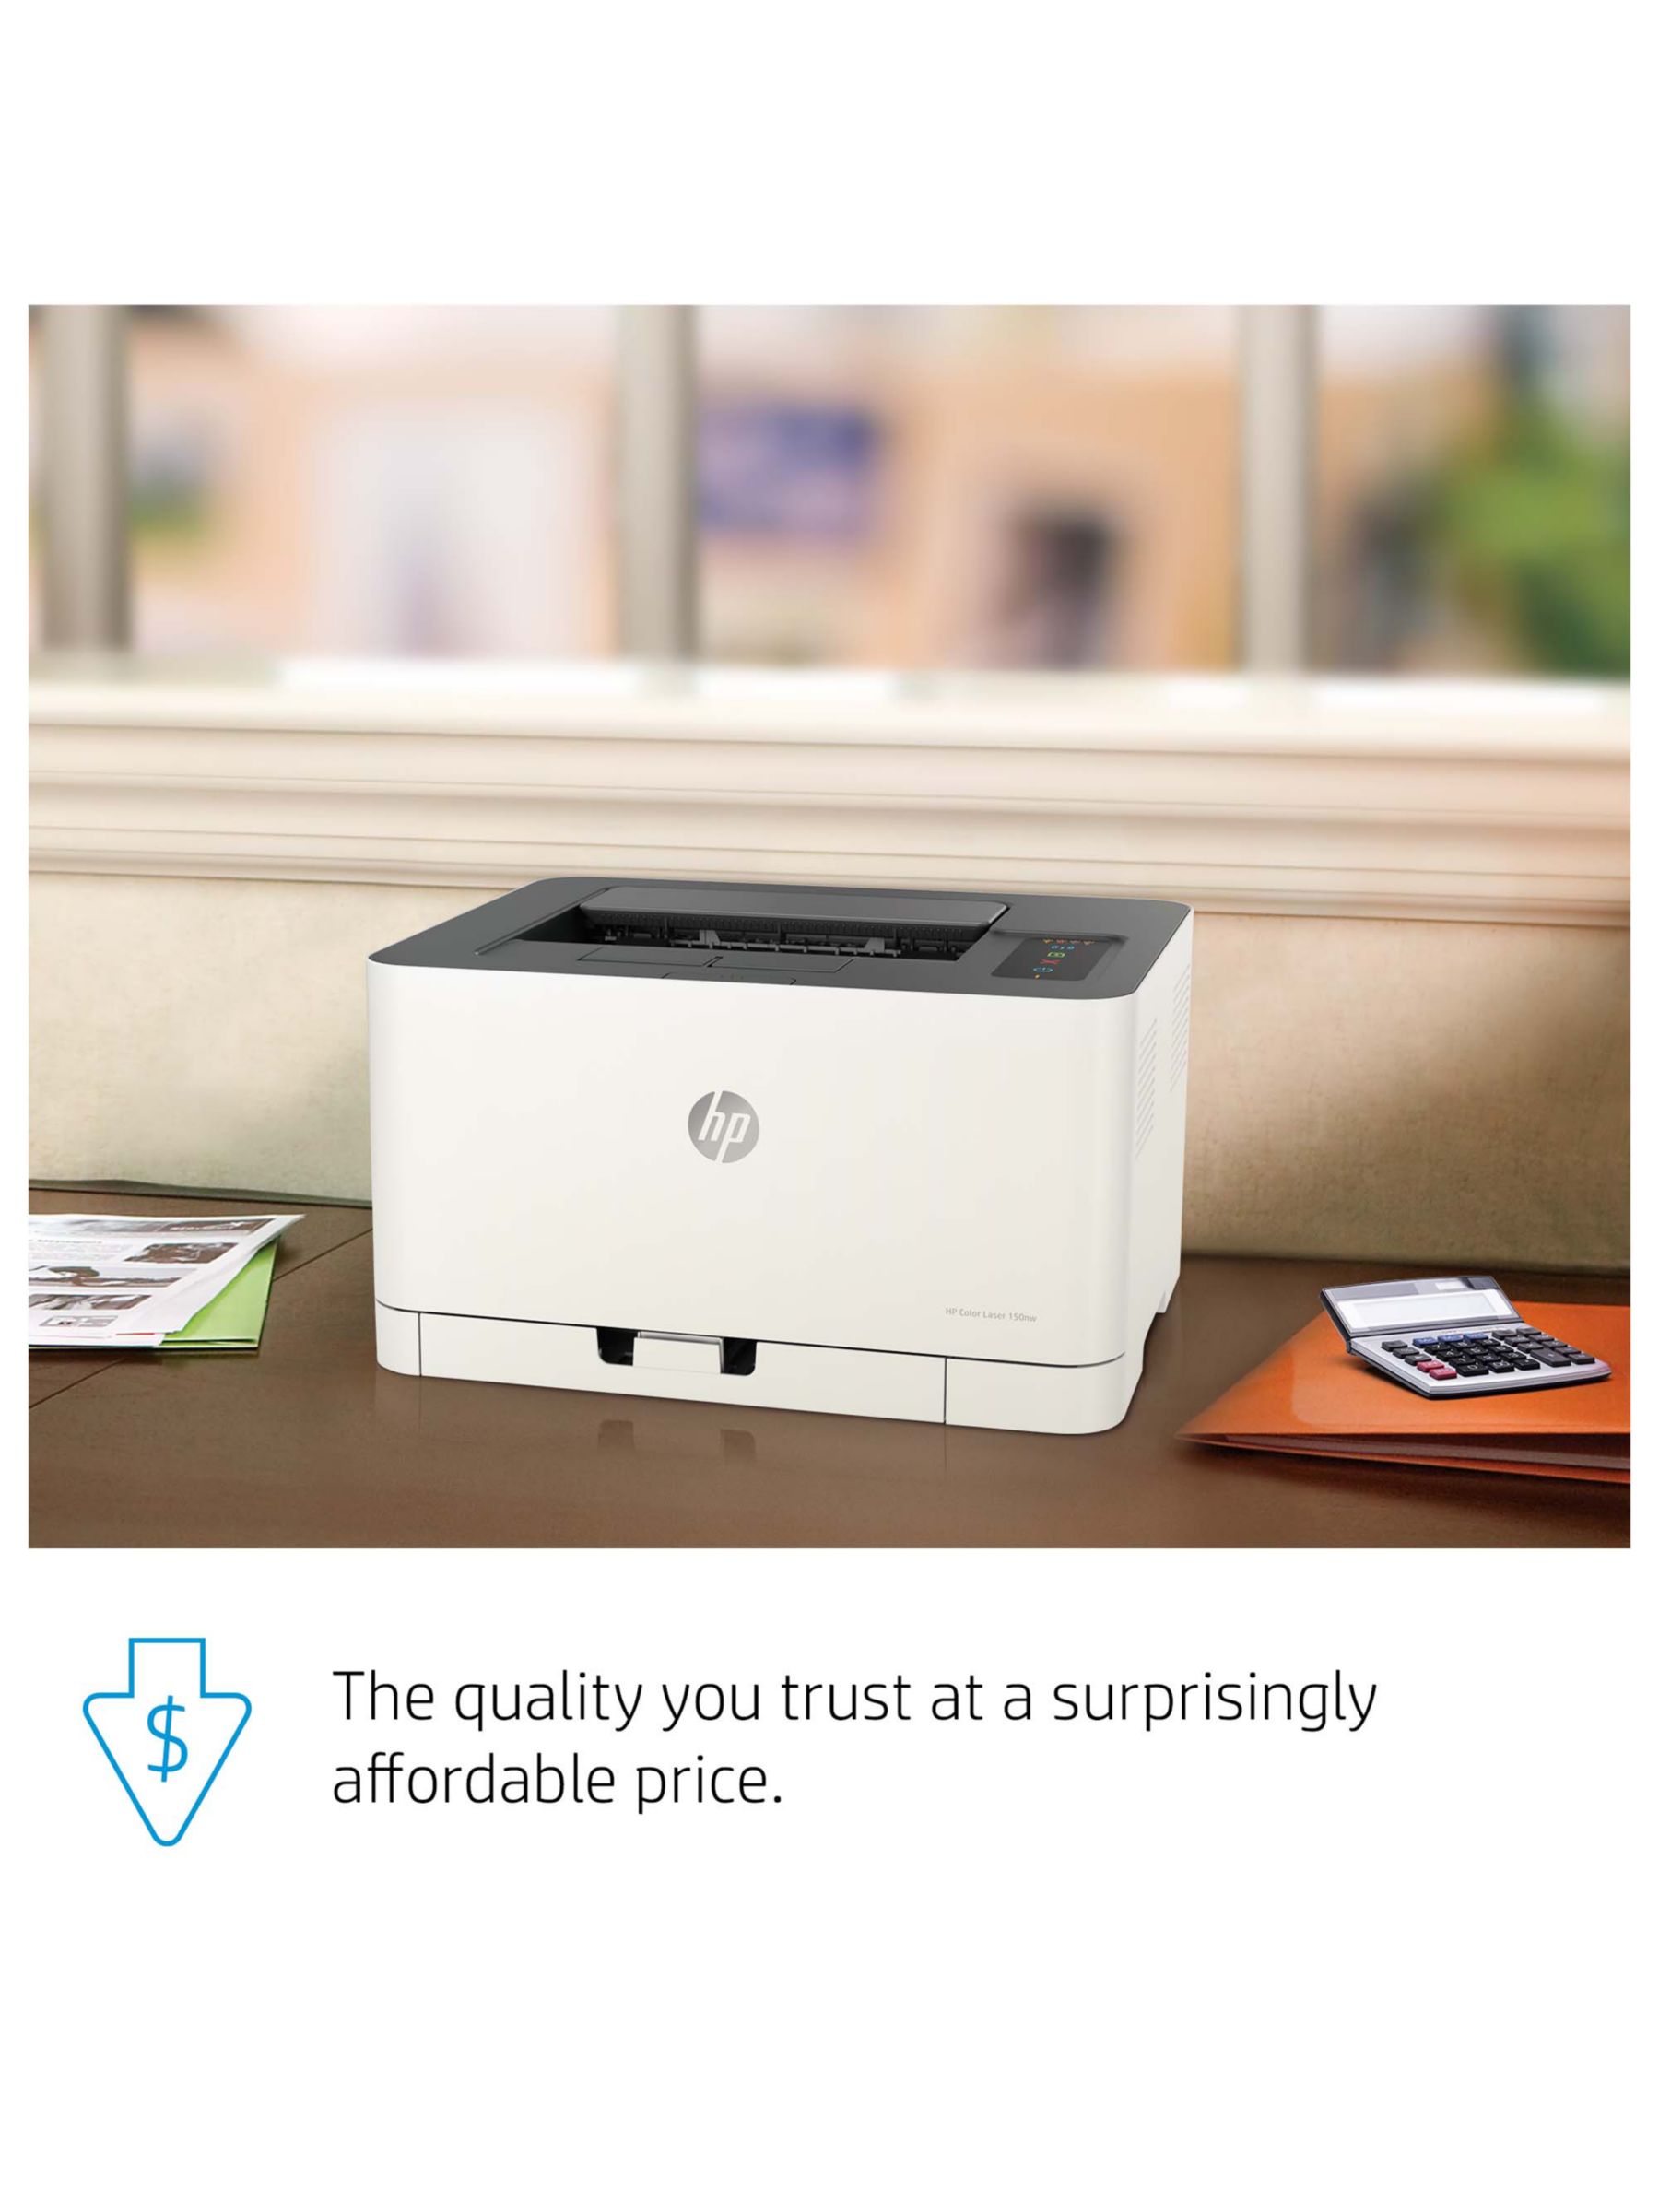 Product  HP Color Laser 150nw - printer - colour - laser